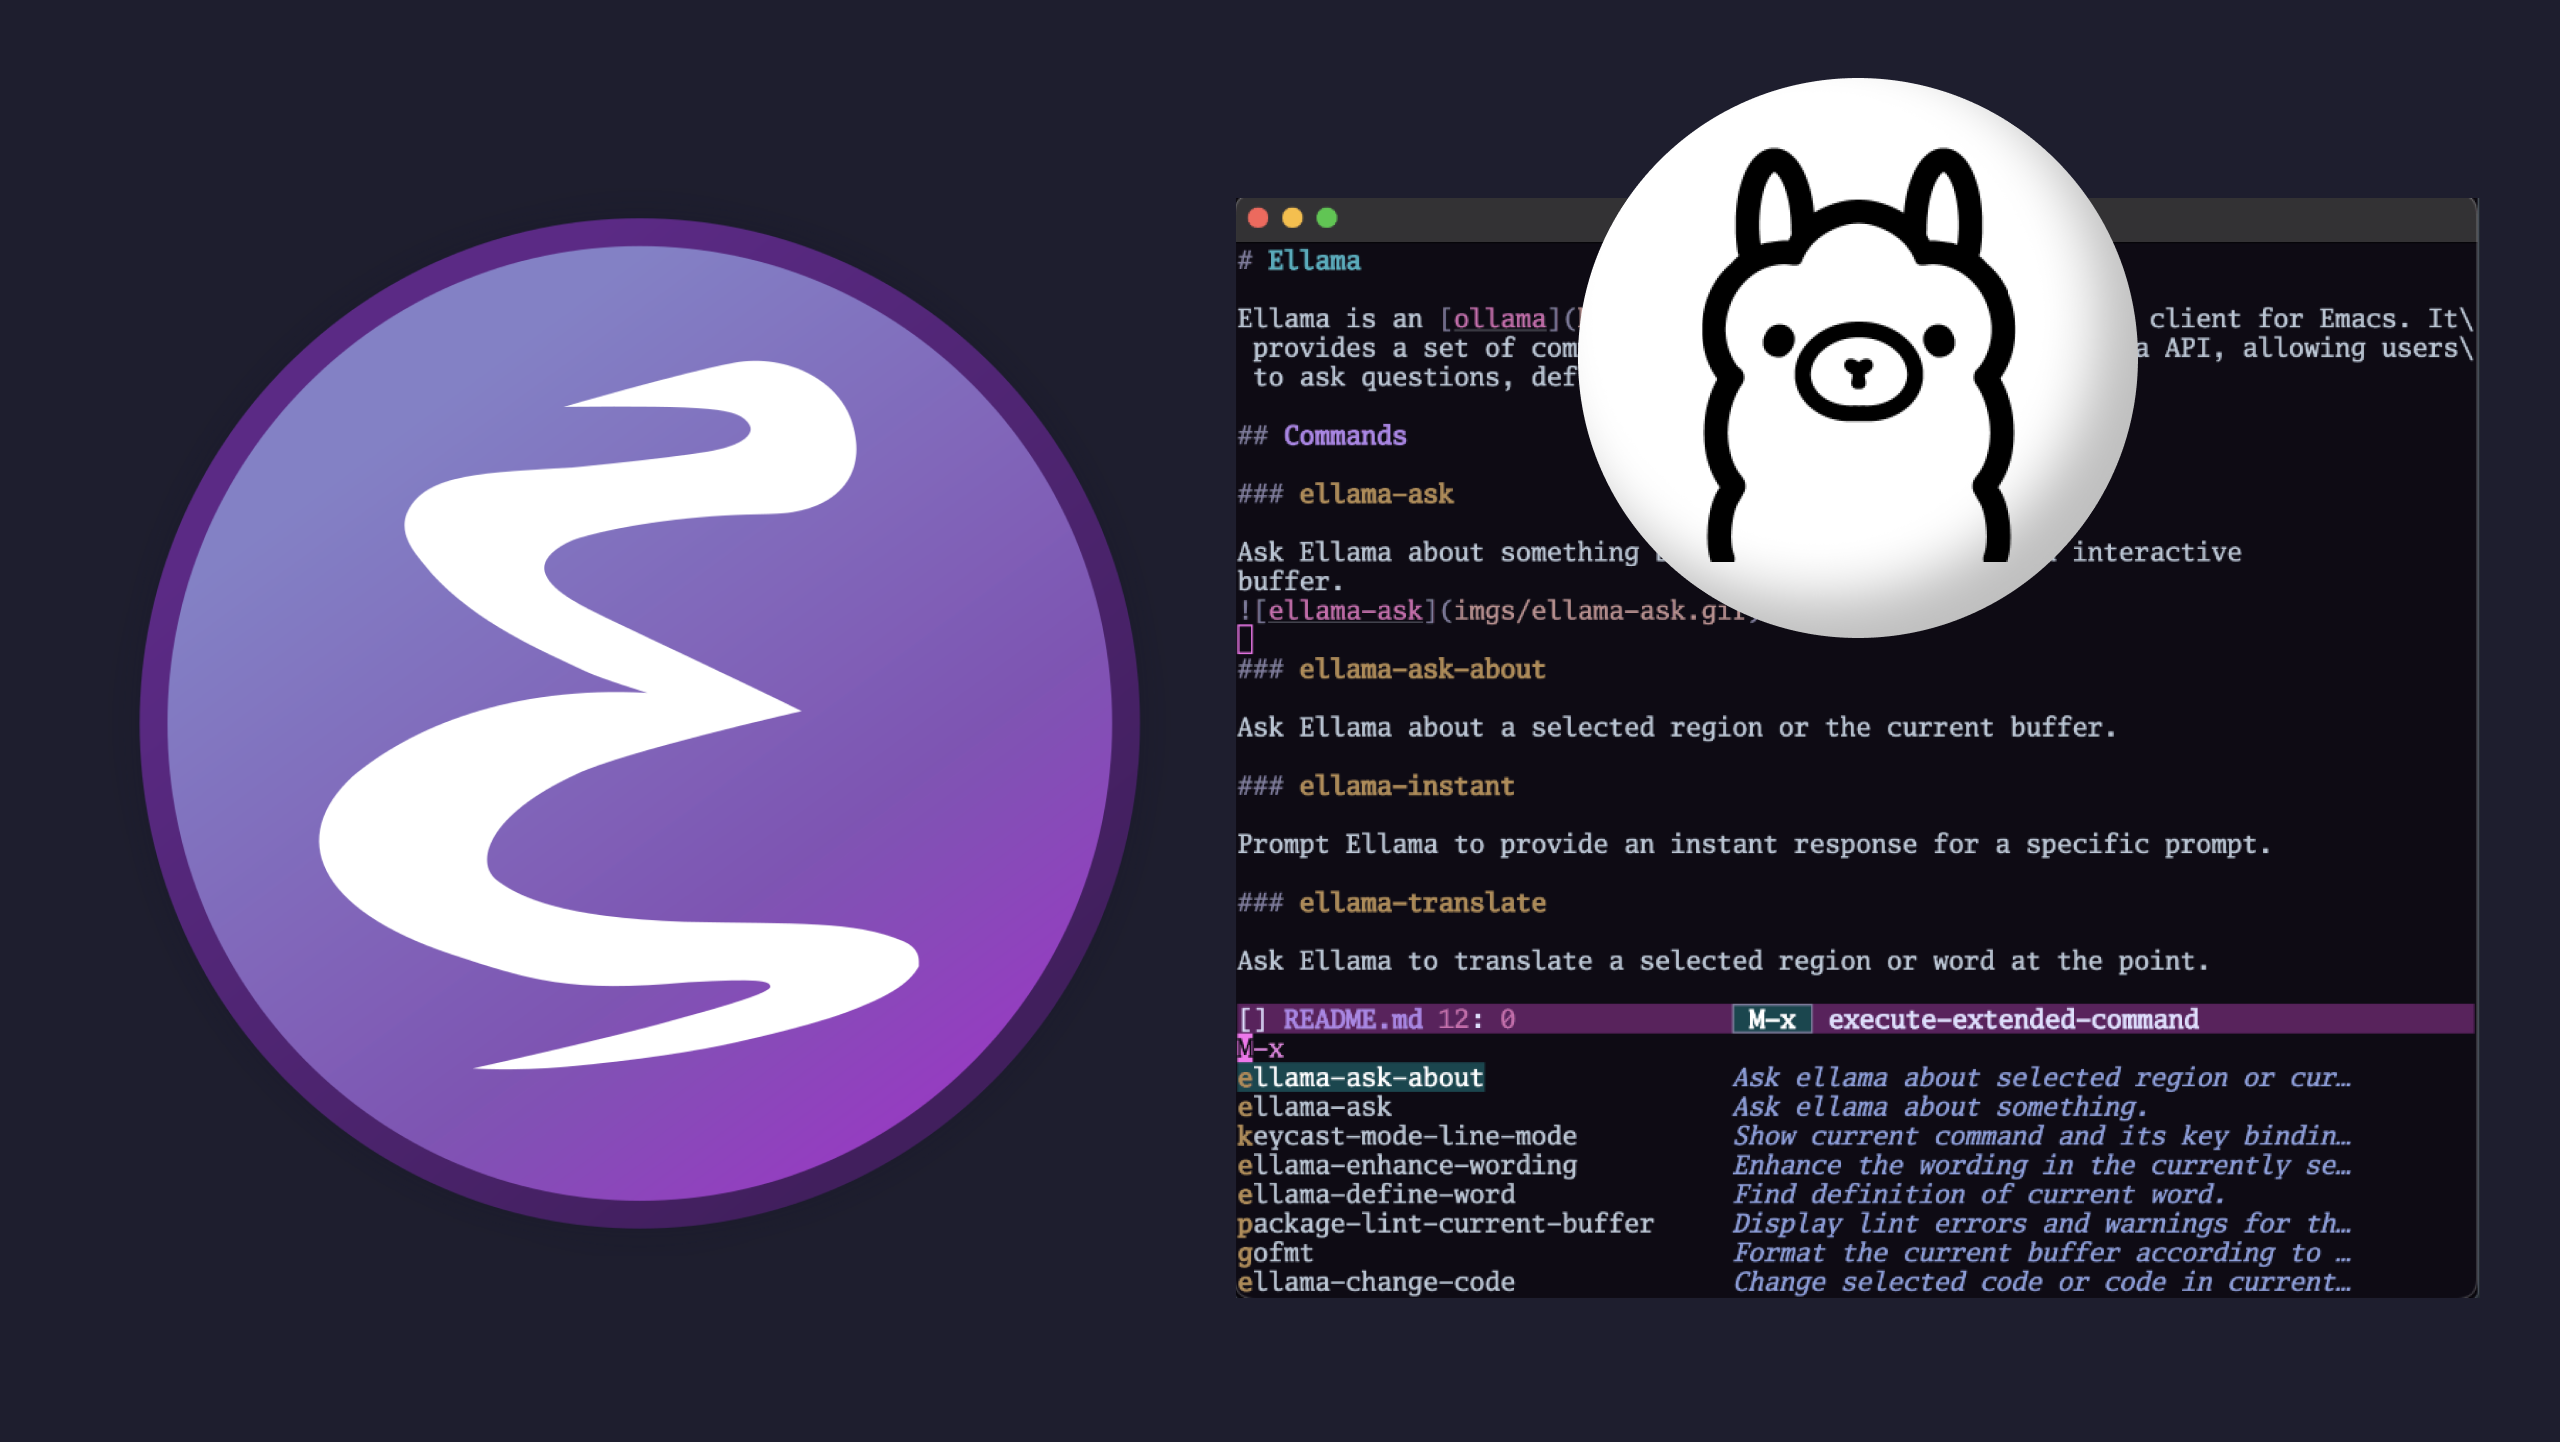 Cover Image for Ollama on Emacs with Ellama